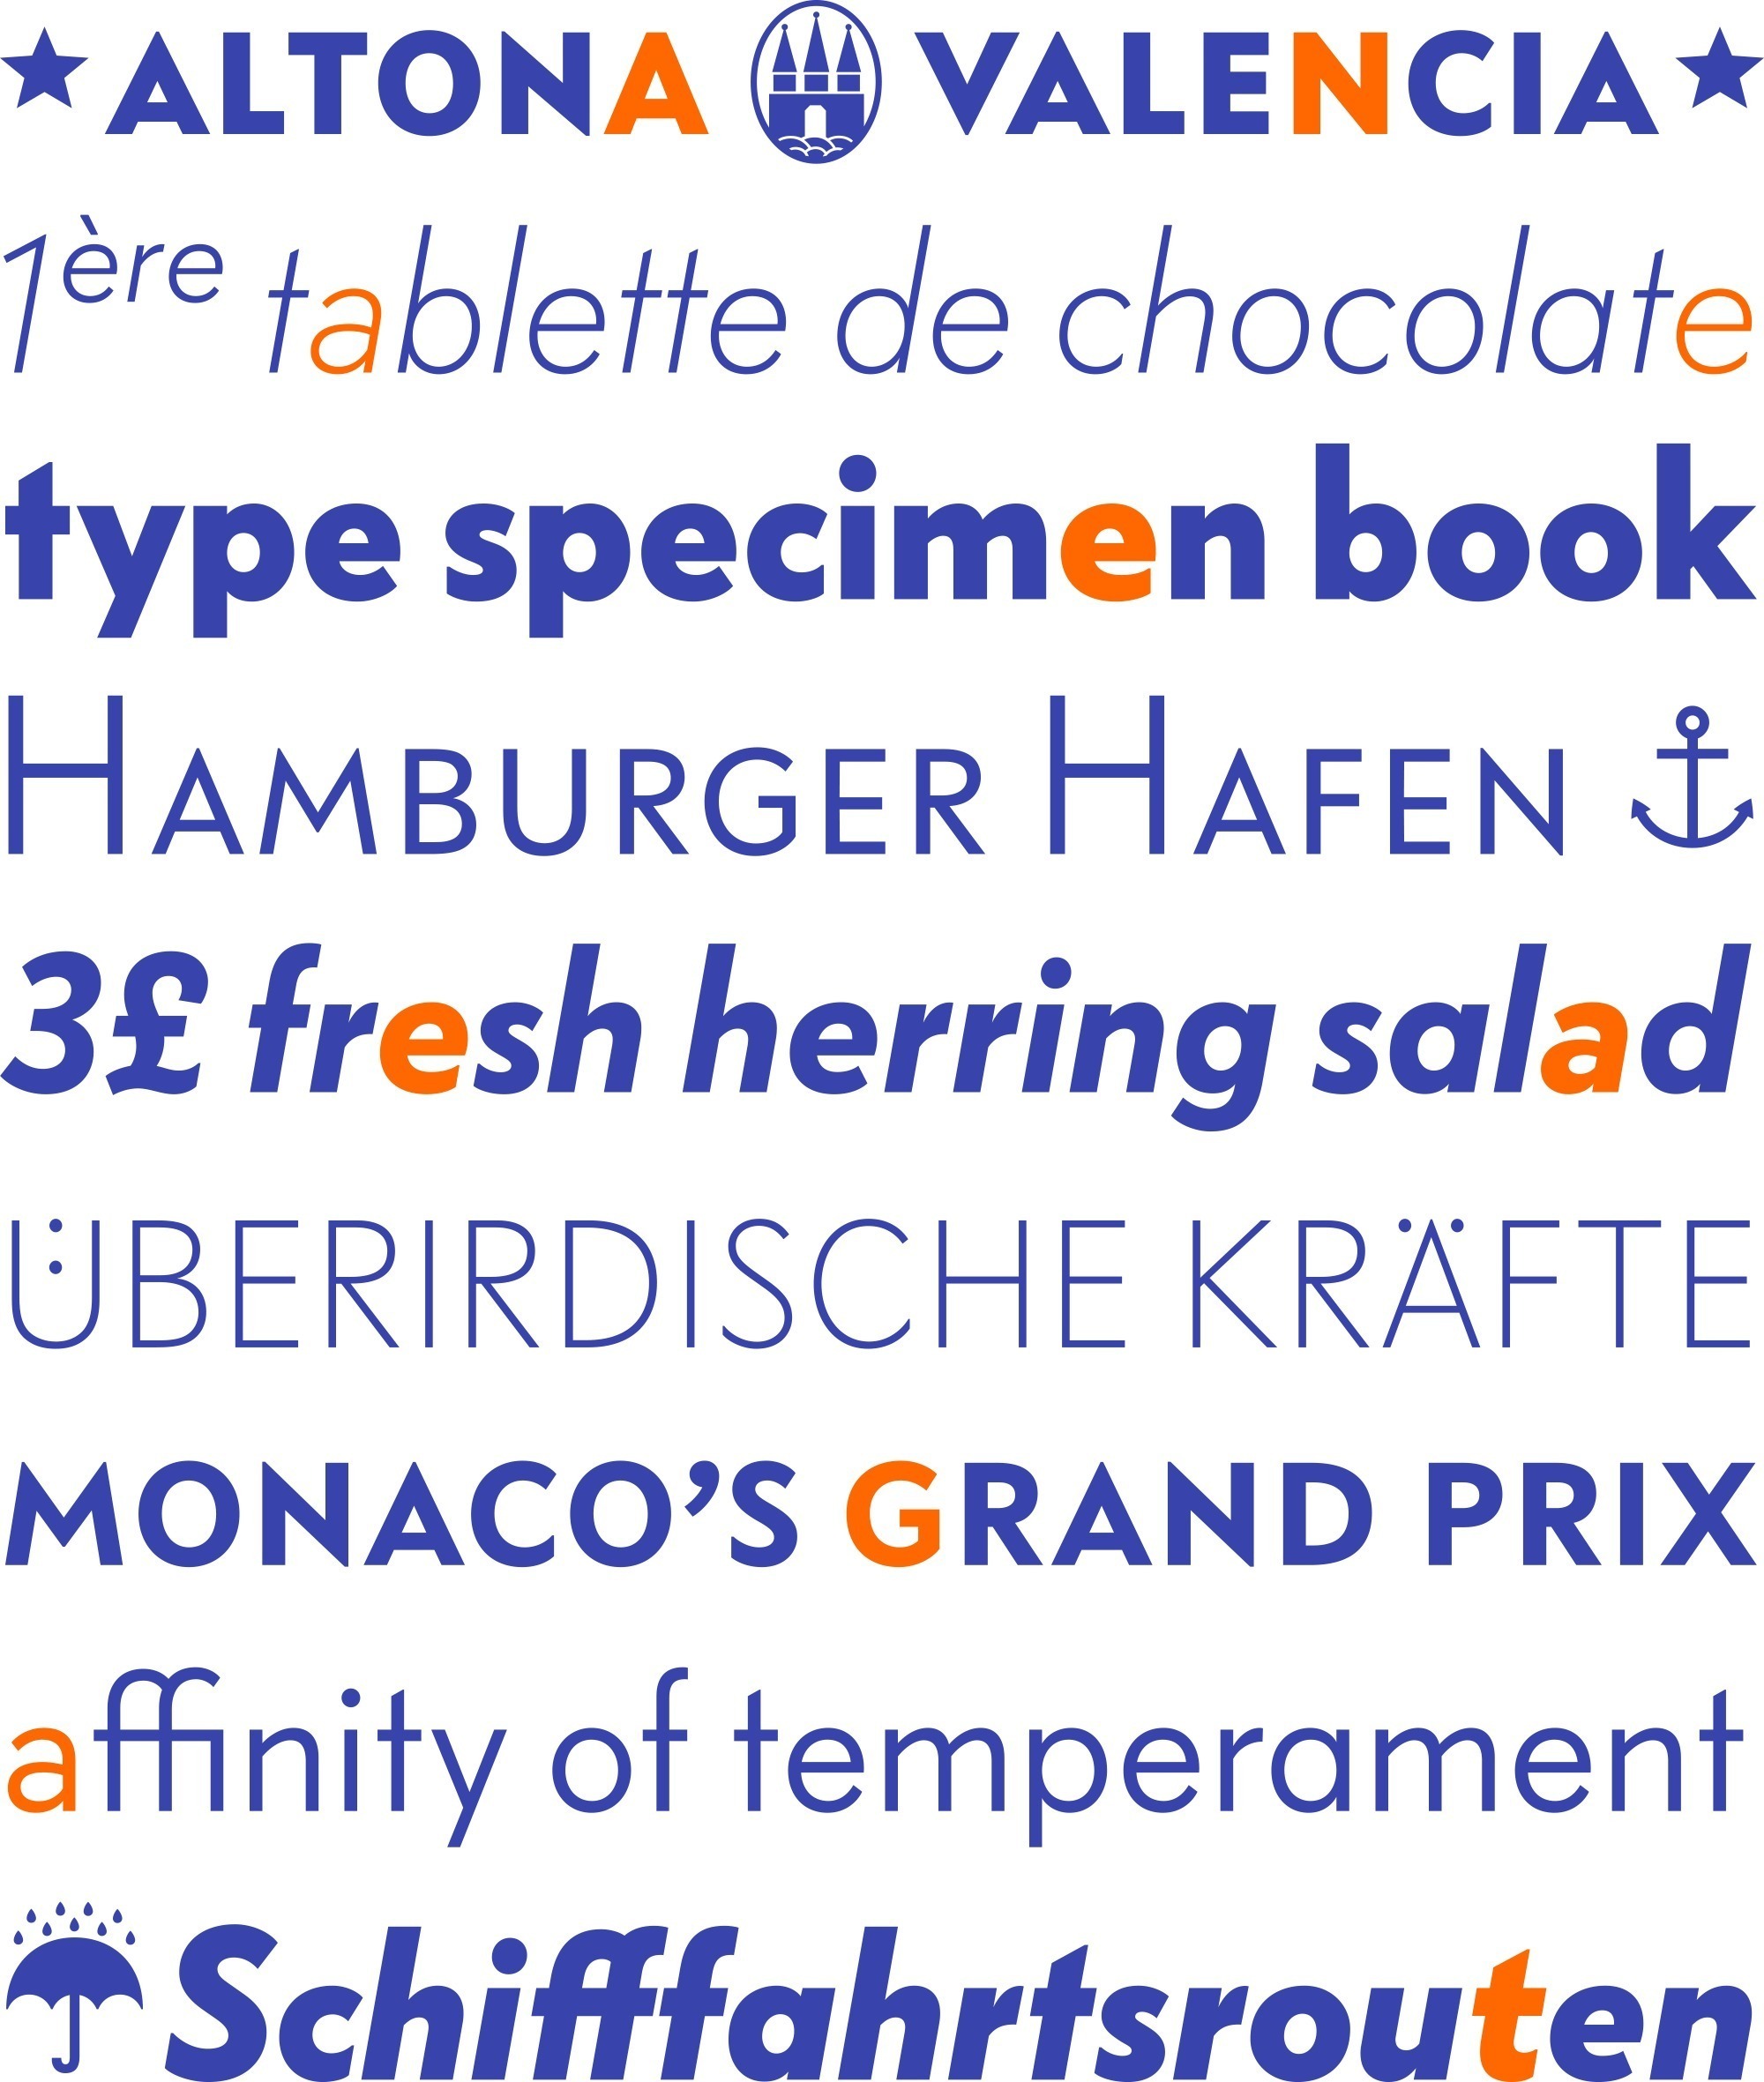 Thomas Ackermann and Felix Bonge equipped the FF Bauer Grotesk typeface with a large variety of alternate characters in the upright and italic weights respectively, e.g. a lower case ‘e’ with two different stroke endings, ‘t’ with a straight and a round terminal. It also comes with playful umlauts such as the dots in the bowl of the ‘Ü’. 